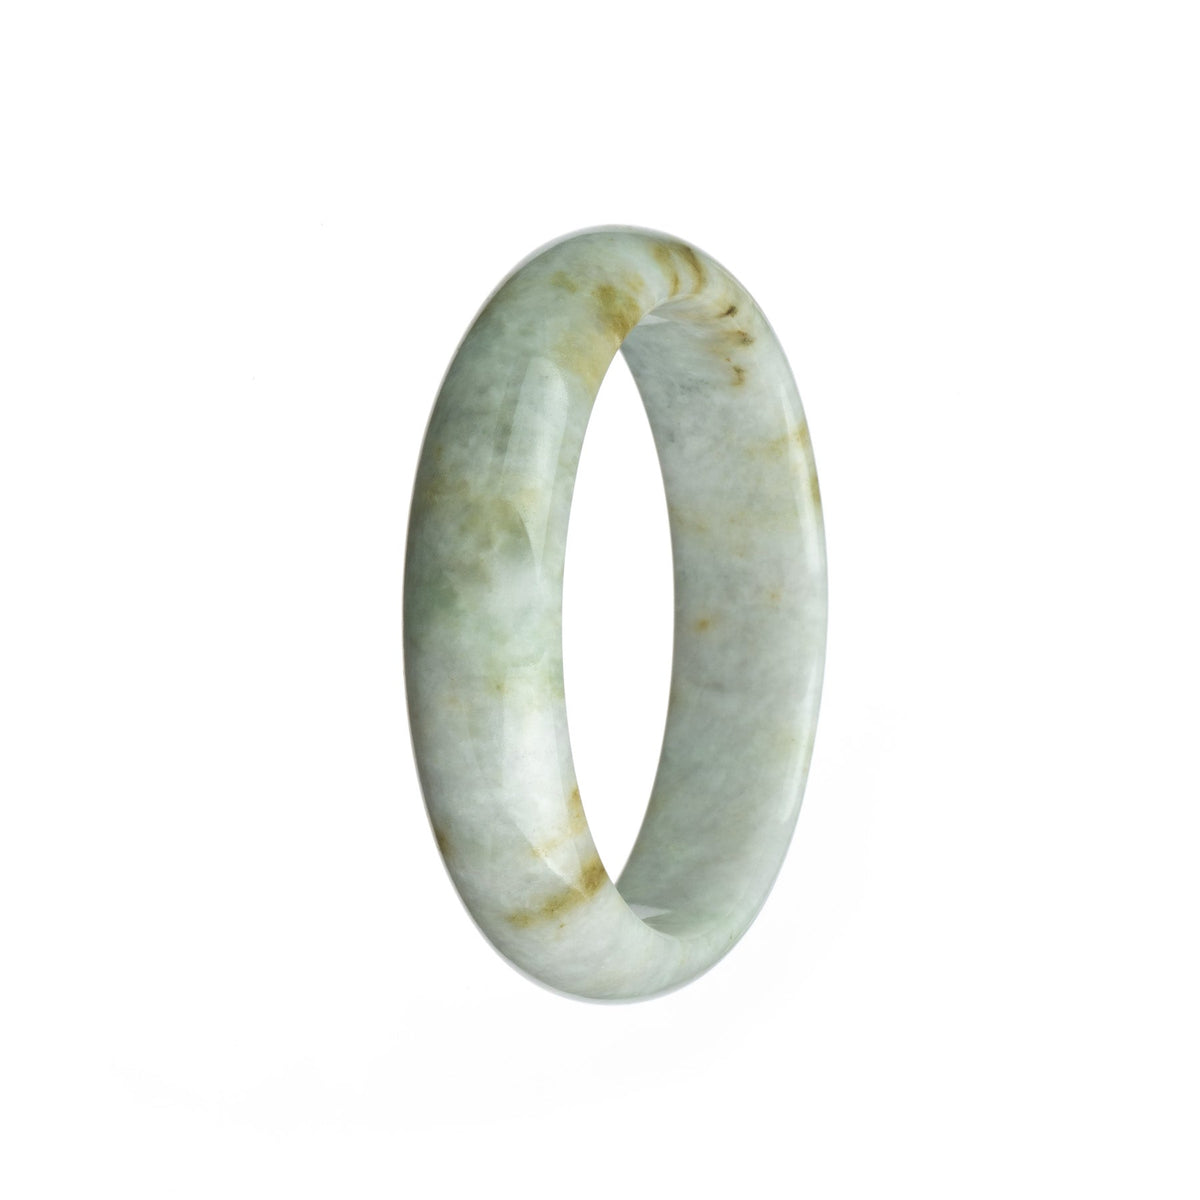 An intricately designed Burmese jade bangle featuring a white base with a beautiful brown pattern, in a half moon shape.